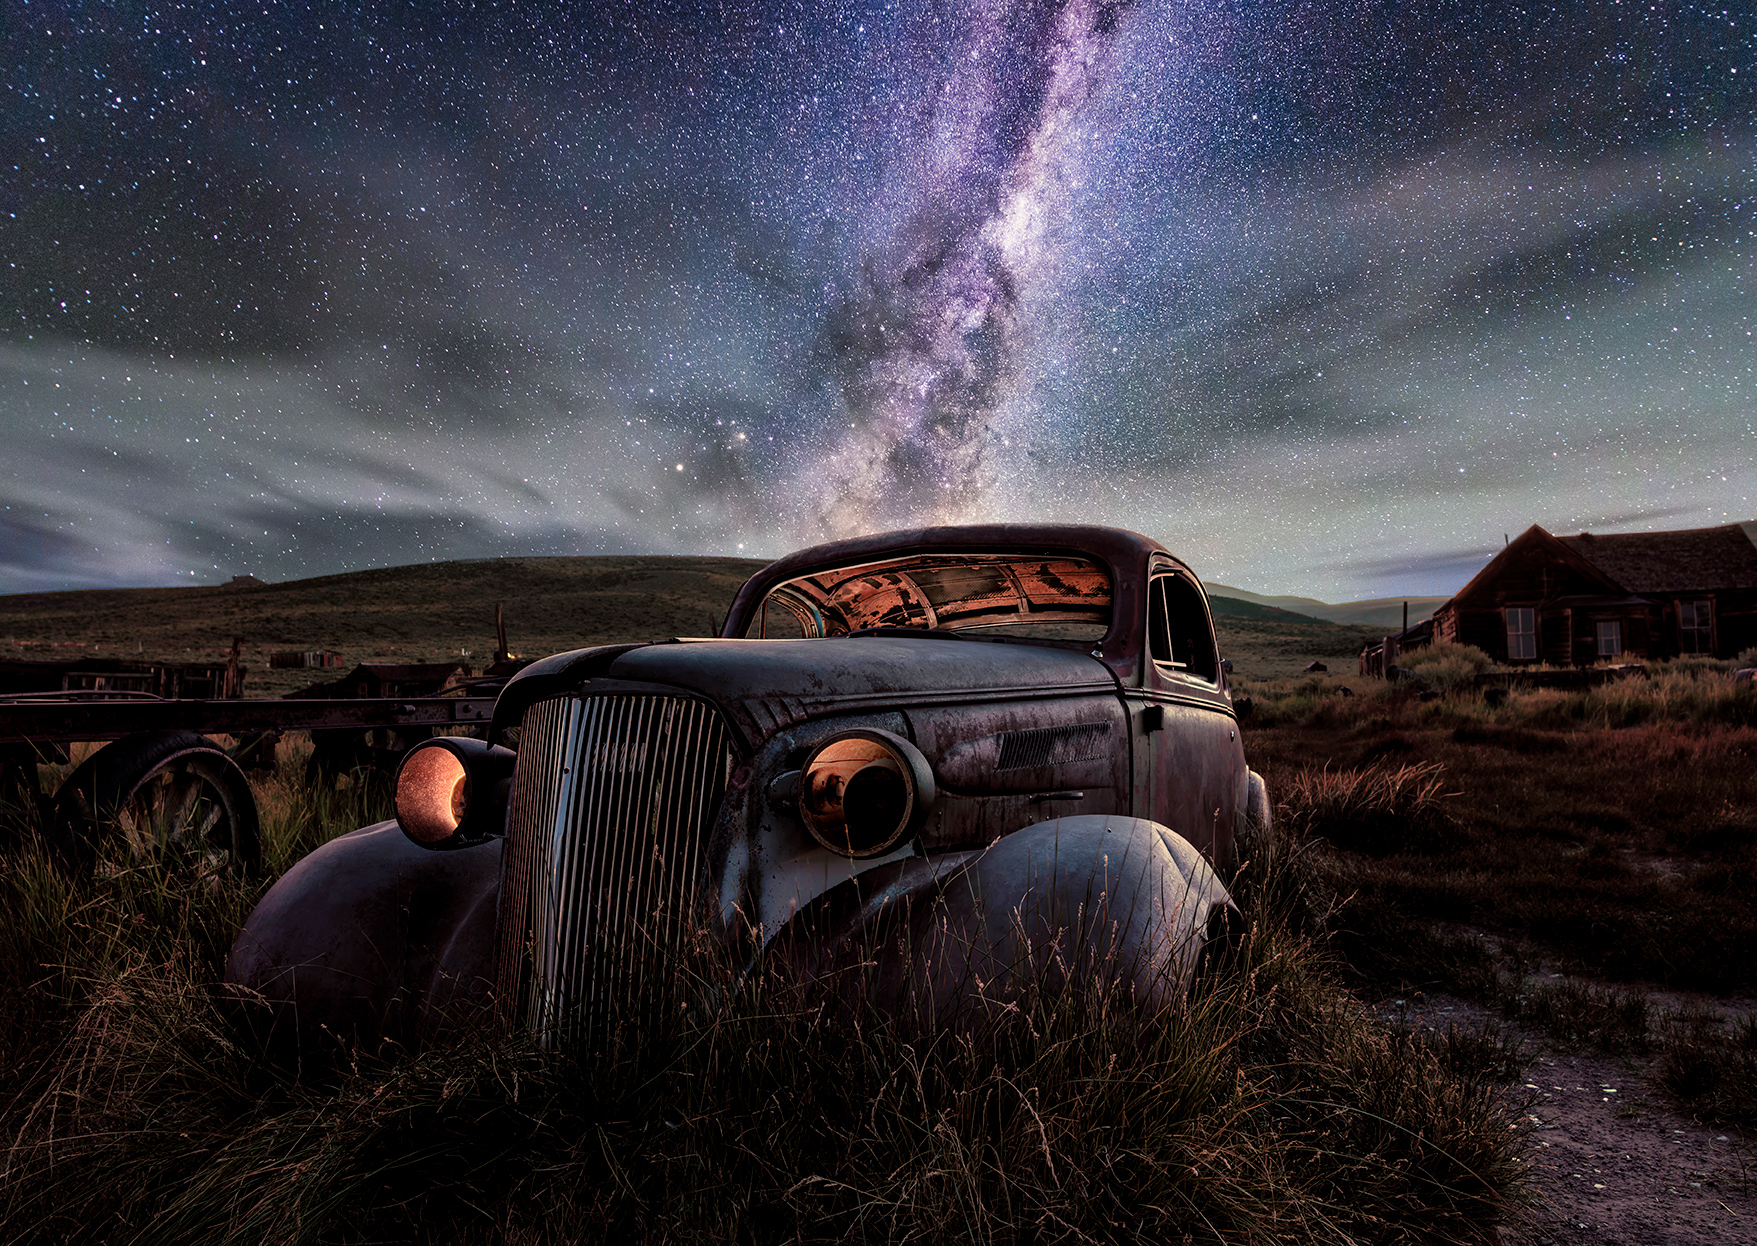 night starscape photography of an old abandoned Chevy in the hills near Mono Lake, California